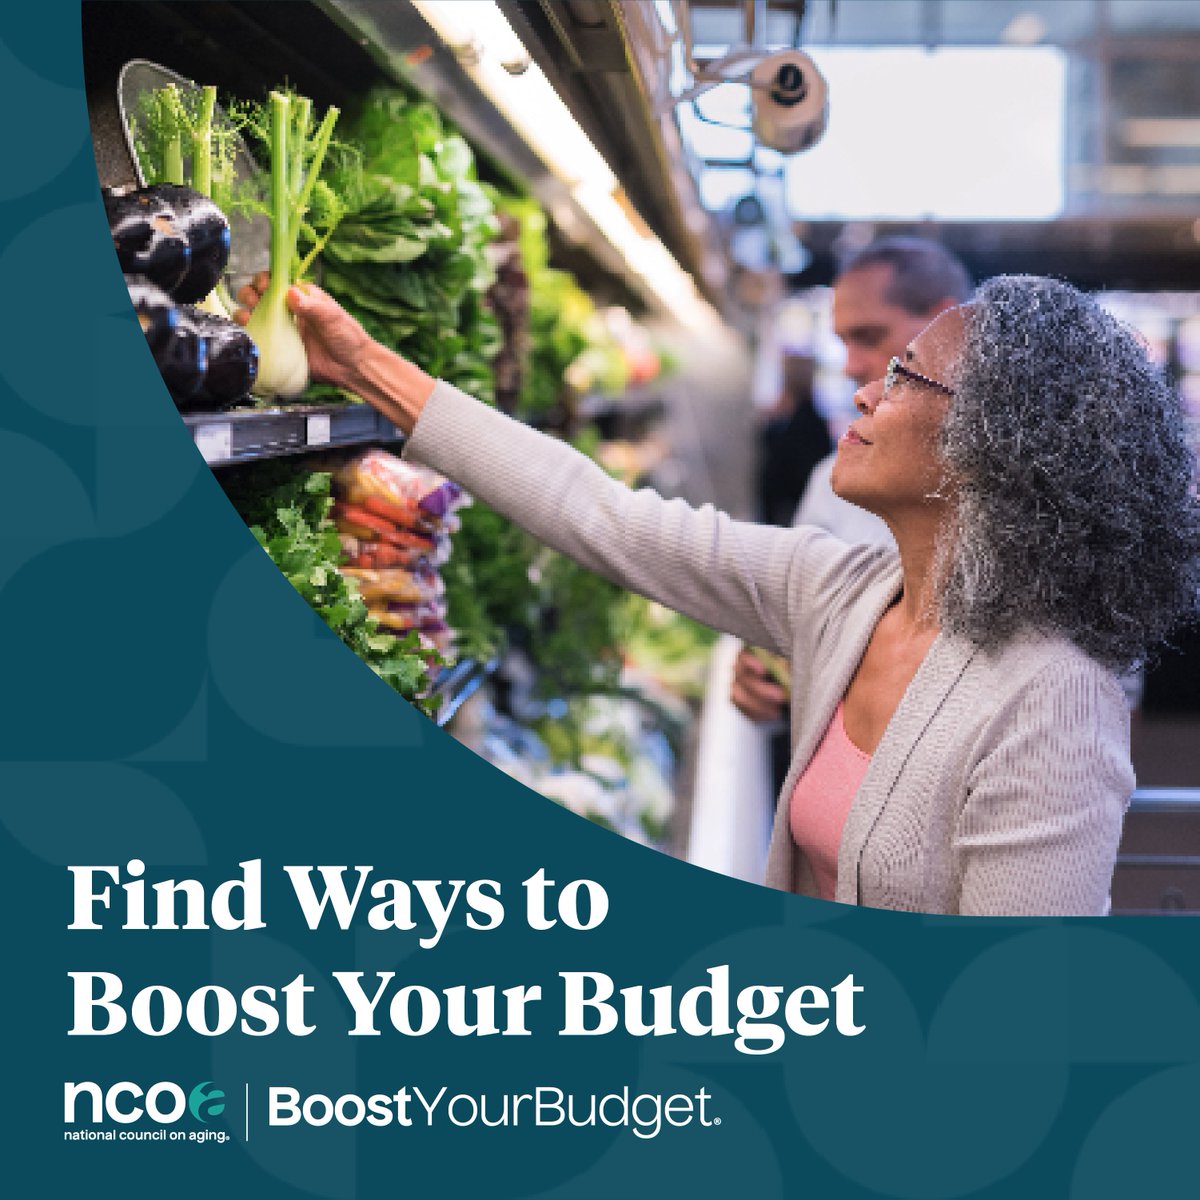 It's #BoostYourBudget Week! Making ends meet on a fixed income is no easy task—and rising inflation has made it even more complicated. Use BenefitsCheckUp® to discover what benefits you may qualify for to pay for daily expenses. ow.ly/UePK50RbOby #BoostYourBudgetWeek #MDOA